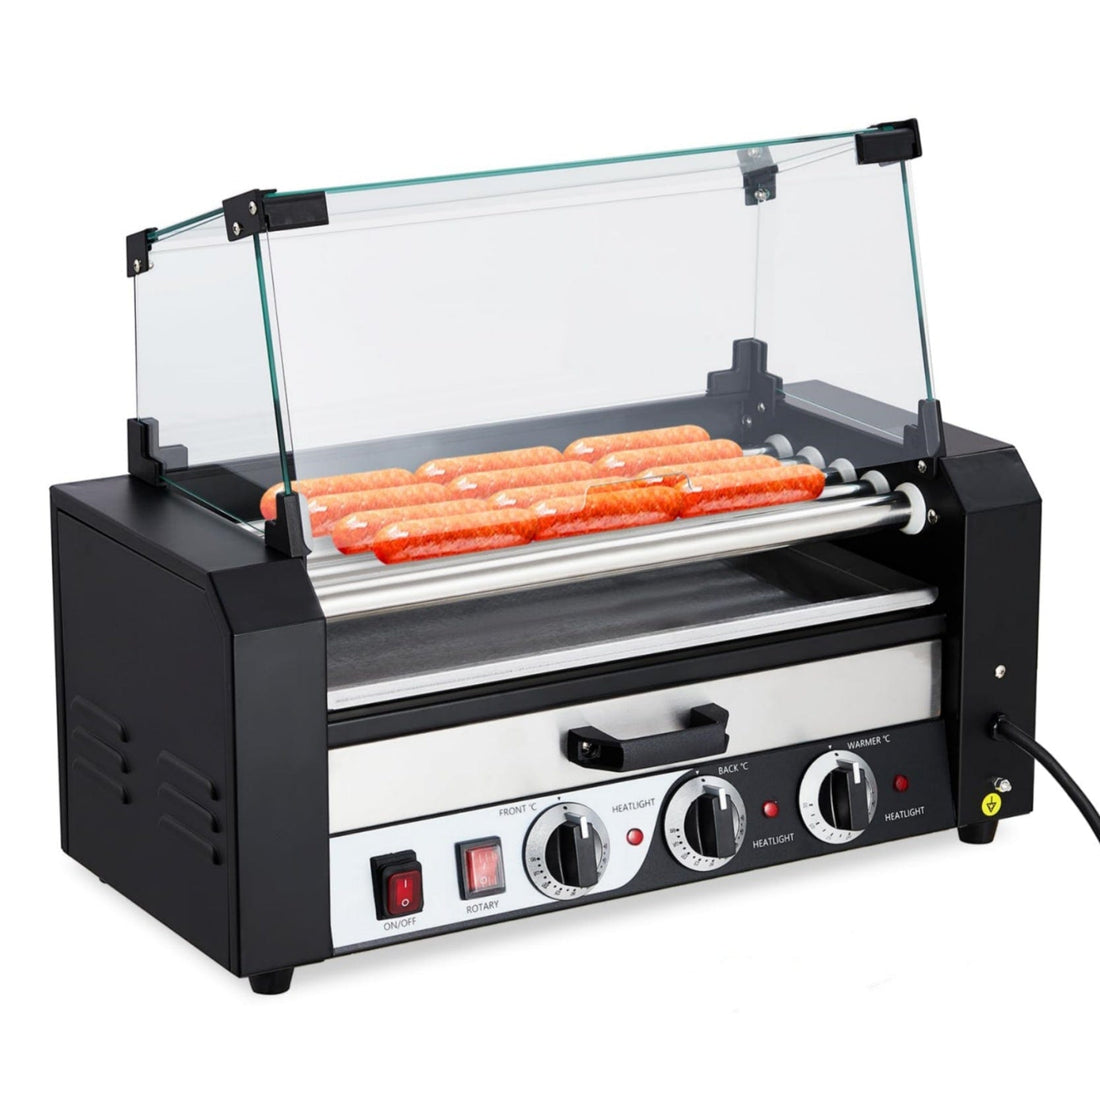 GARVEE Hot Dog Roller 5 Rollers 12 Hot Dogs Capacity 1050W Stainless Sausage Grill Cooker Machine